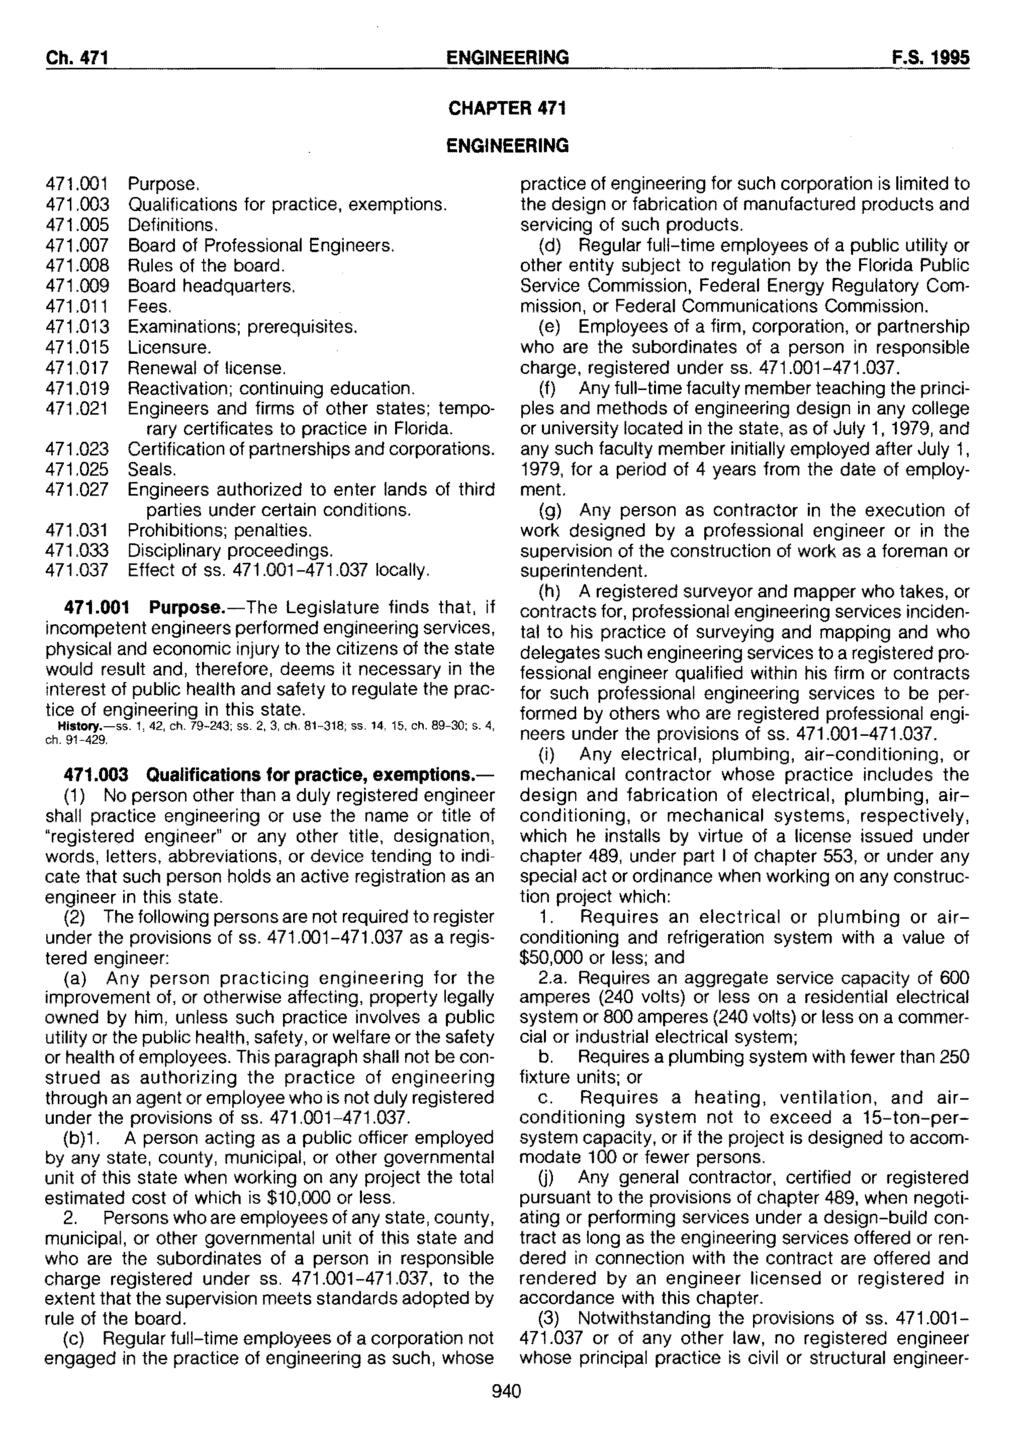 Ch. 471 ENGINEERING F.S. 1995 471.001 Purpose. 471.003 Qualifications for practice, exemptions. 471.005 Definitions. 471.007 Board of Professional Engineers. 471.008 Rules of the board. 471.009 Board headquarters.